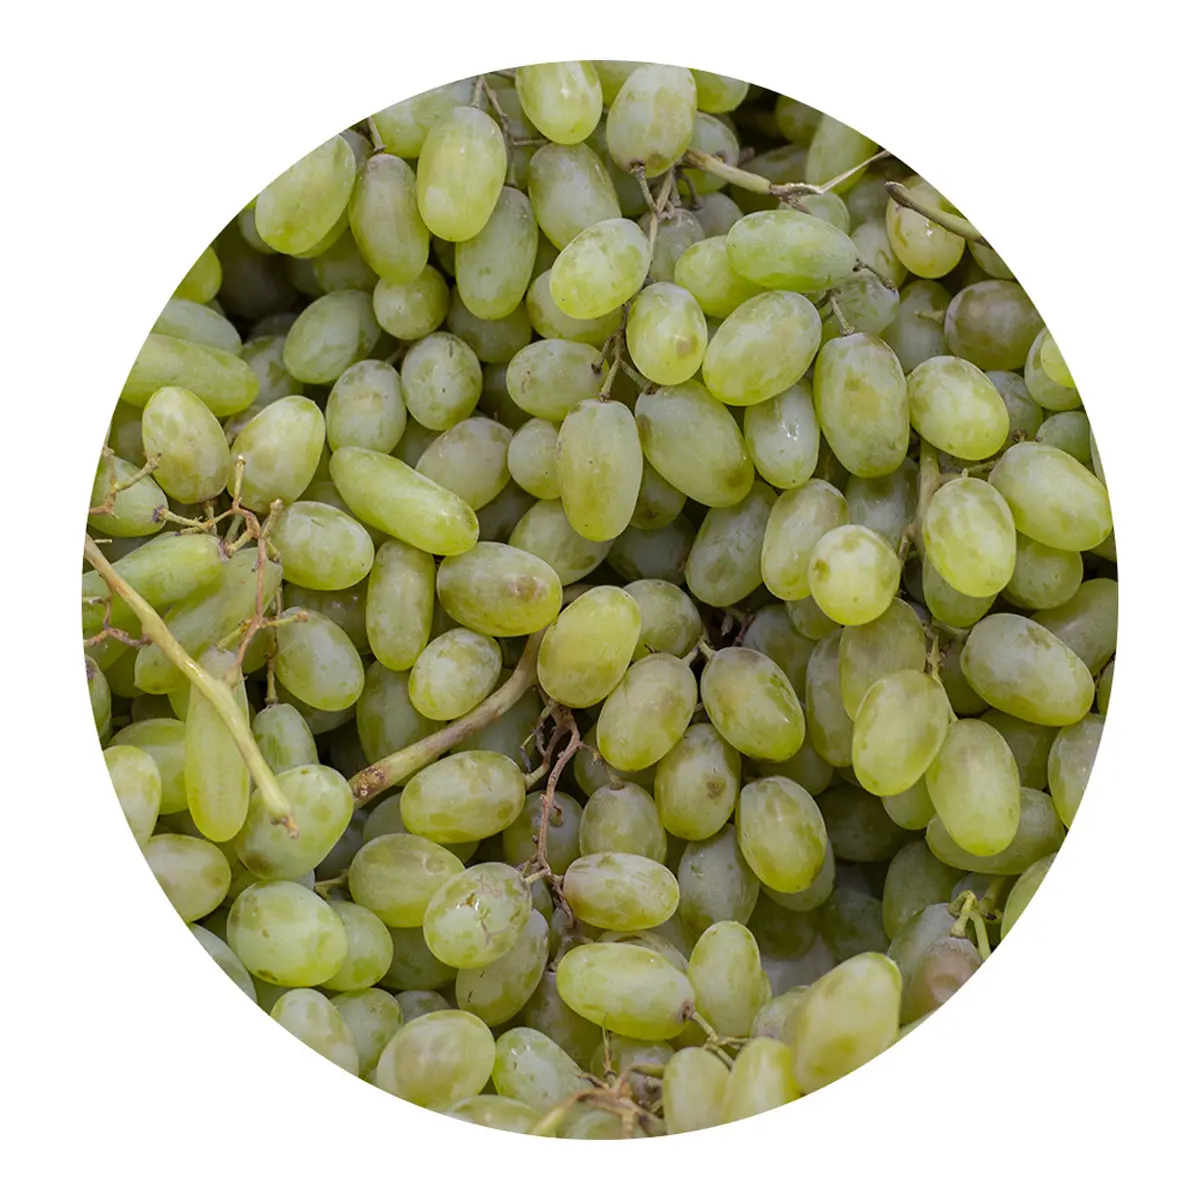 Grown grapes for sale from the manufacturer bulk in price